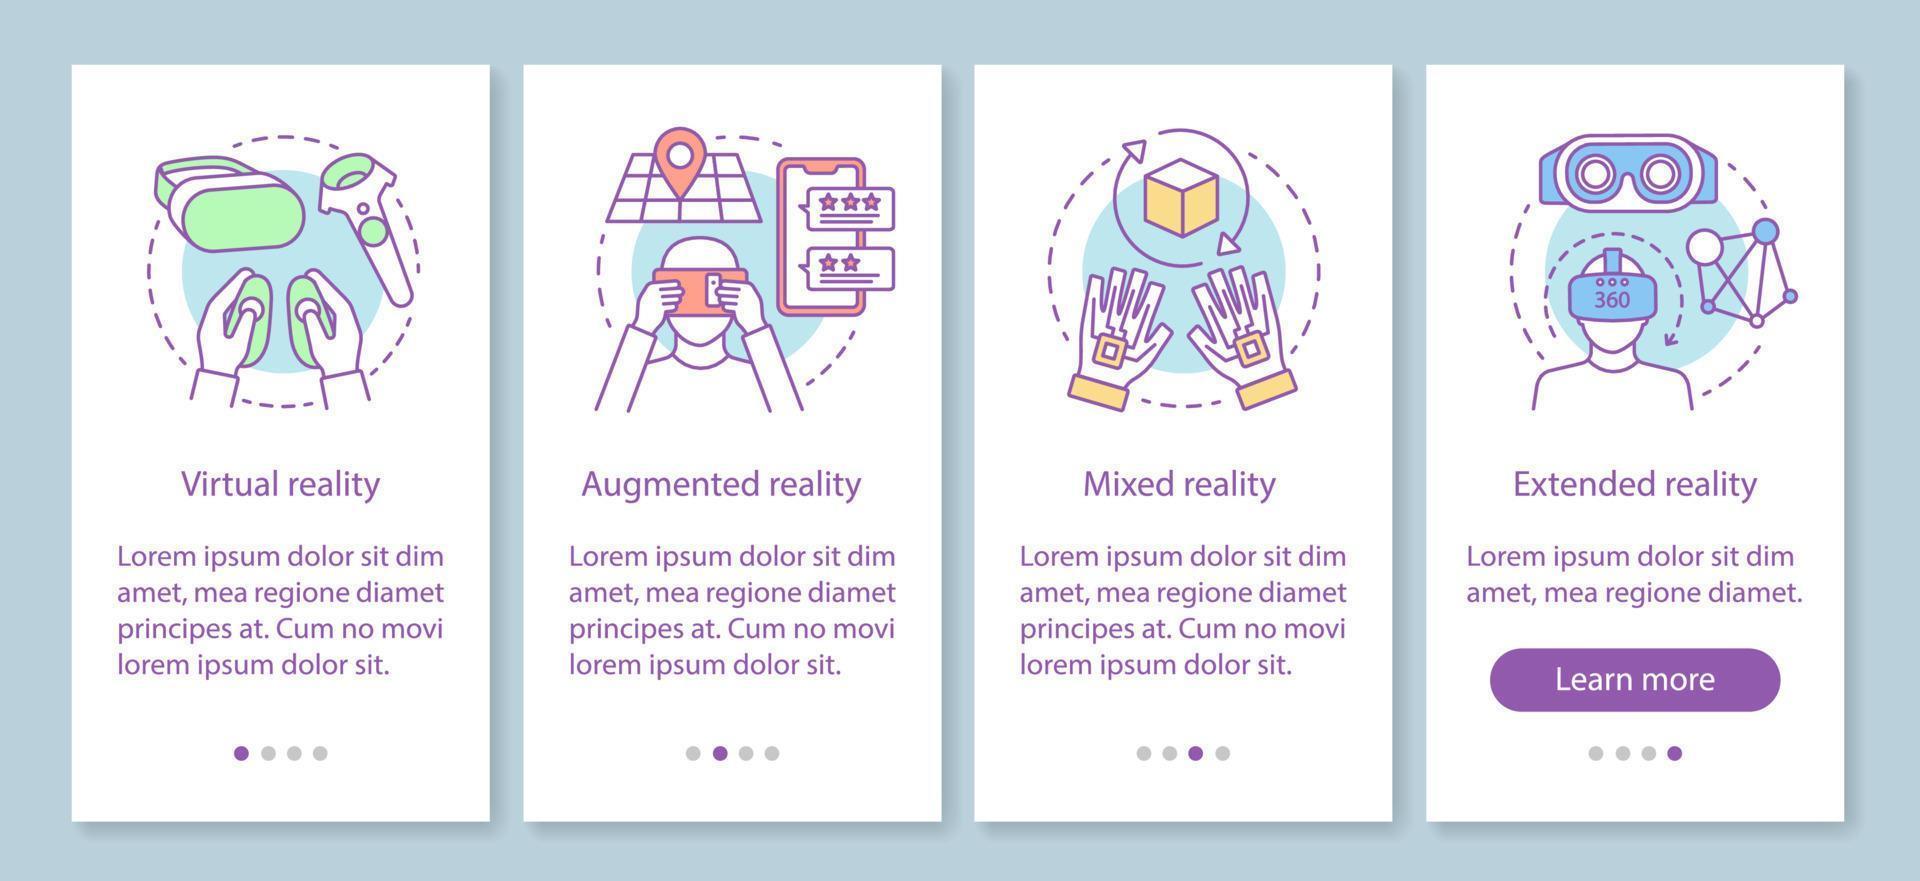 VR technology onboarding mobile app page screen with linear concept. Virtual, augmented, mixed, extended realities walkthrough steps graphic instructions. UX, UI vector